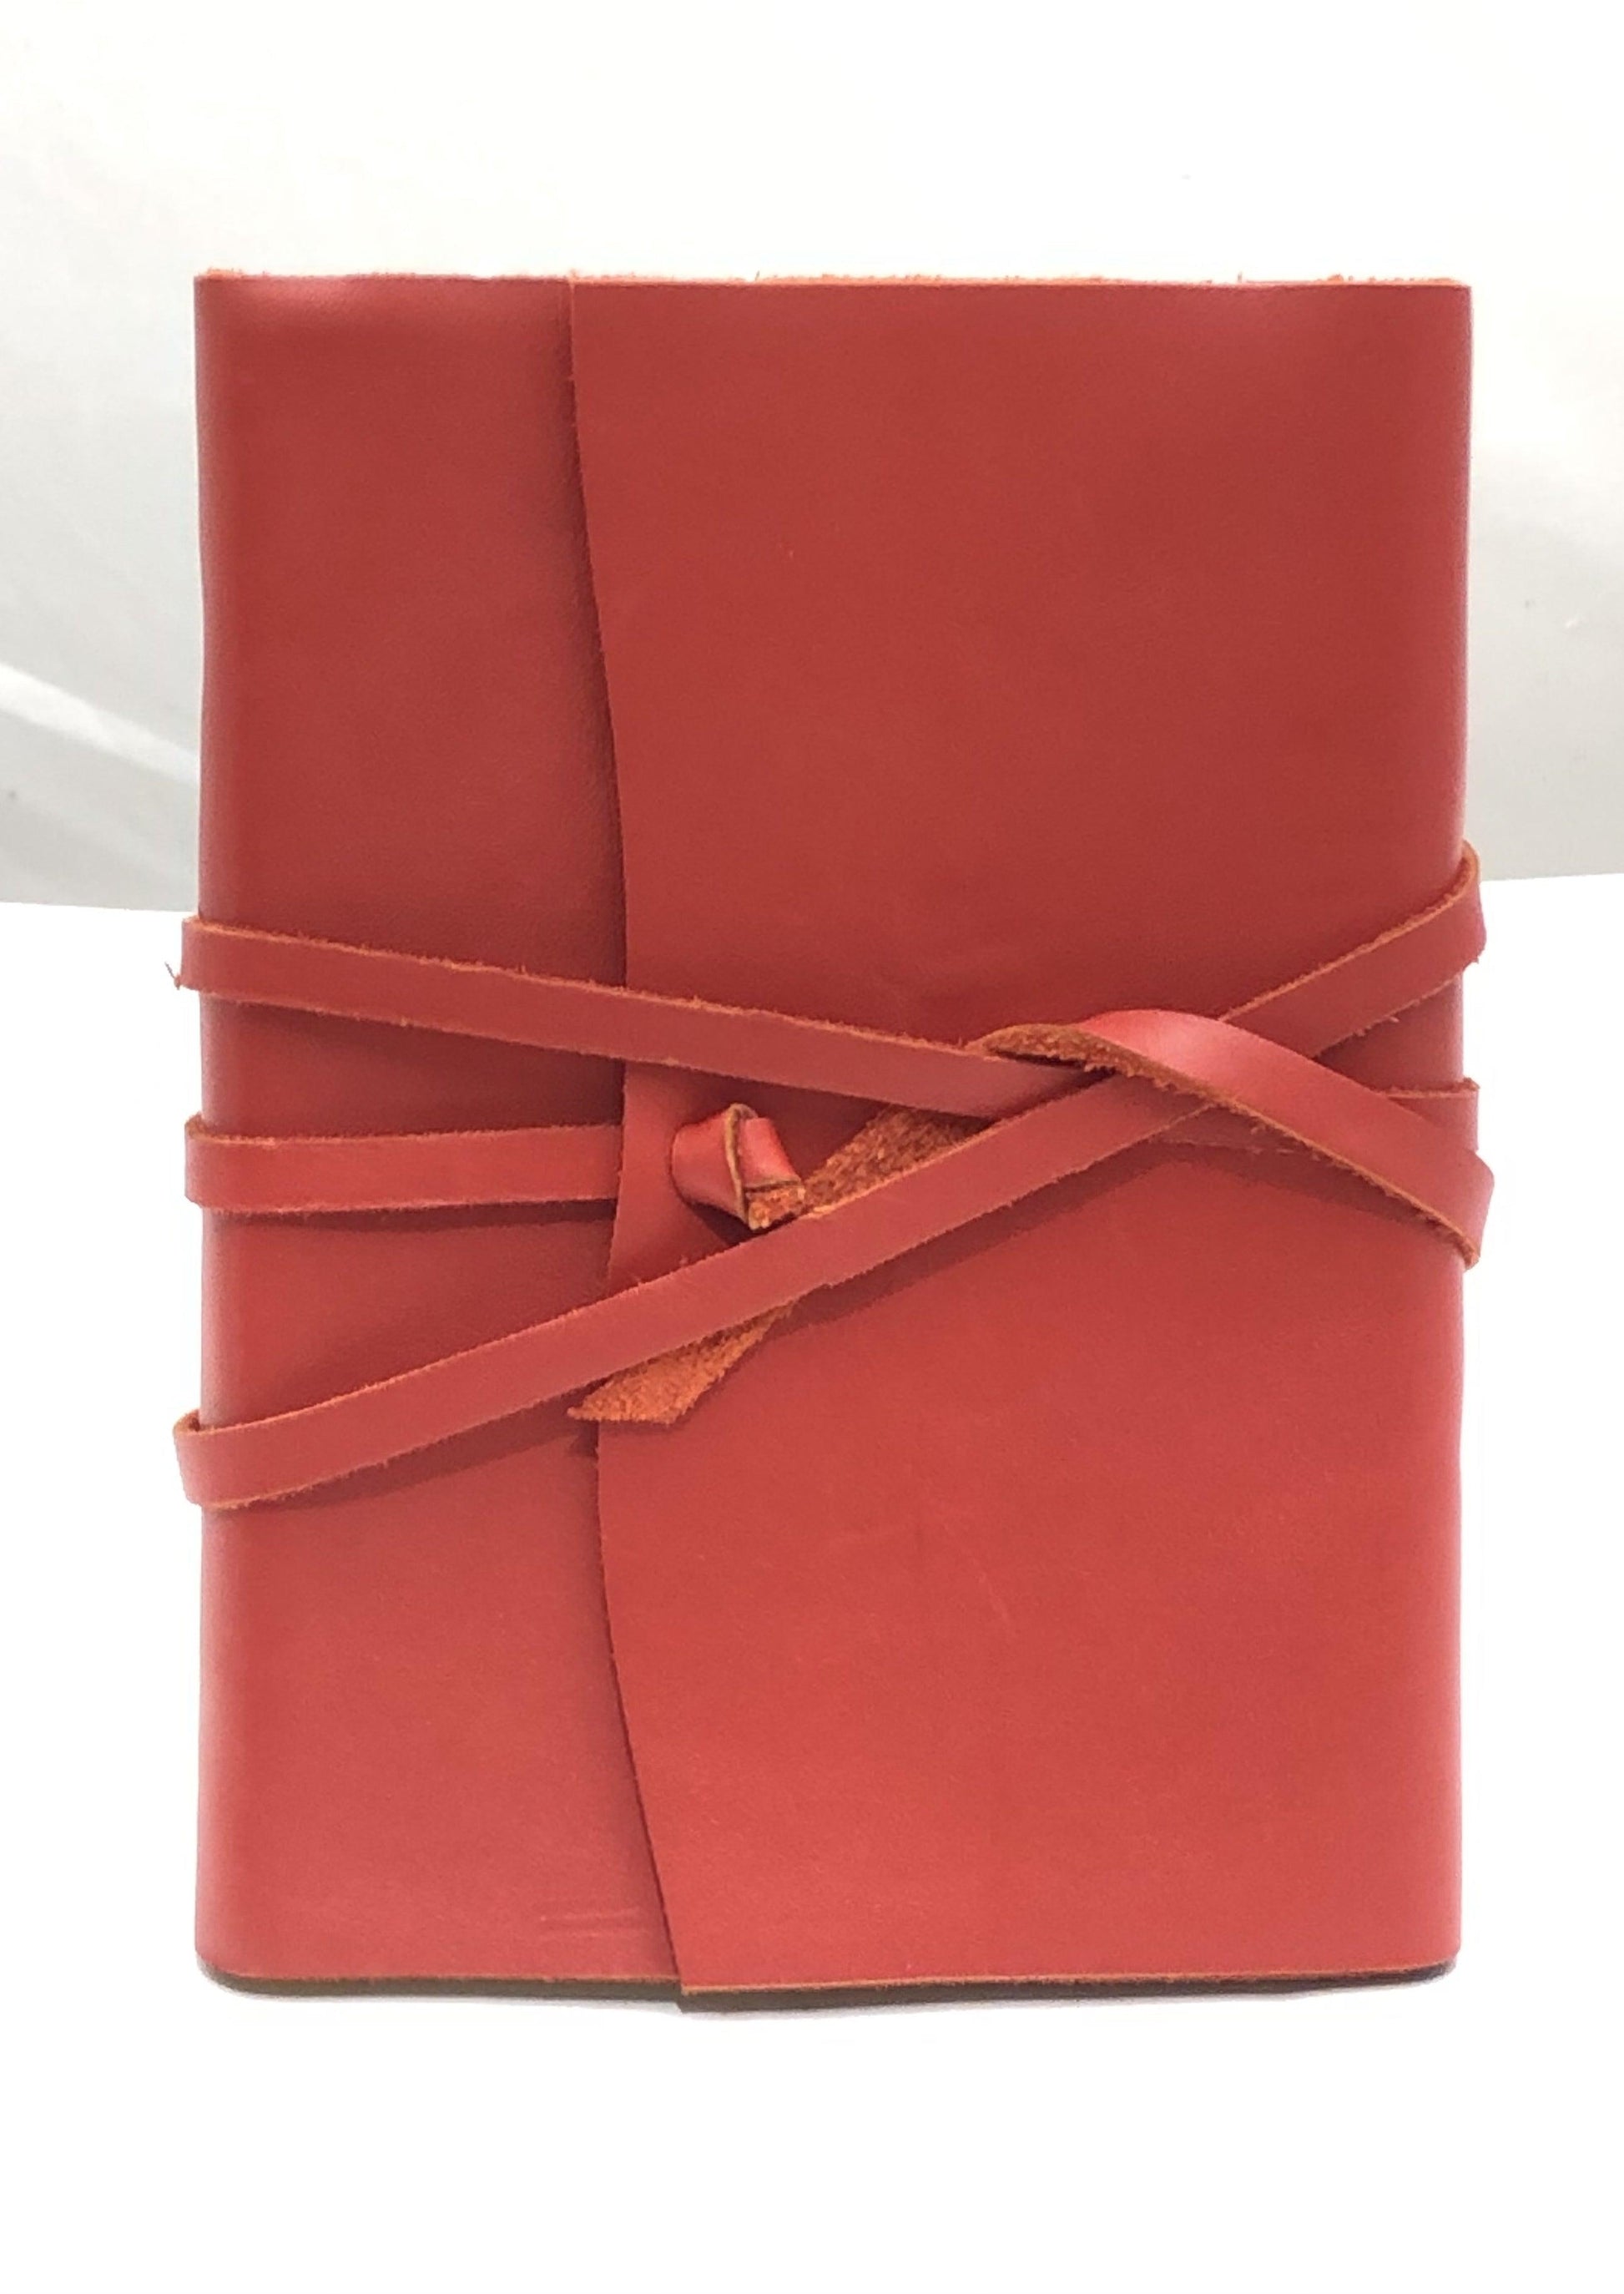 Wrap Leather Journal Medioevalis Red Large - Handworks Nouveau Paperie